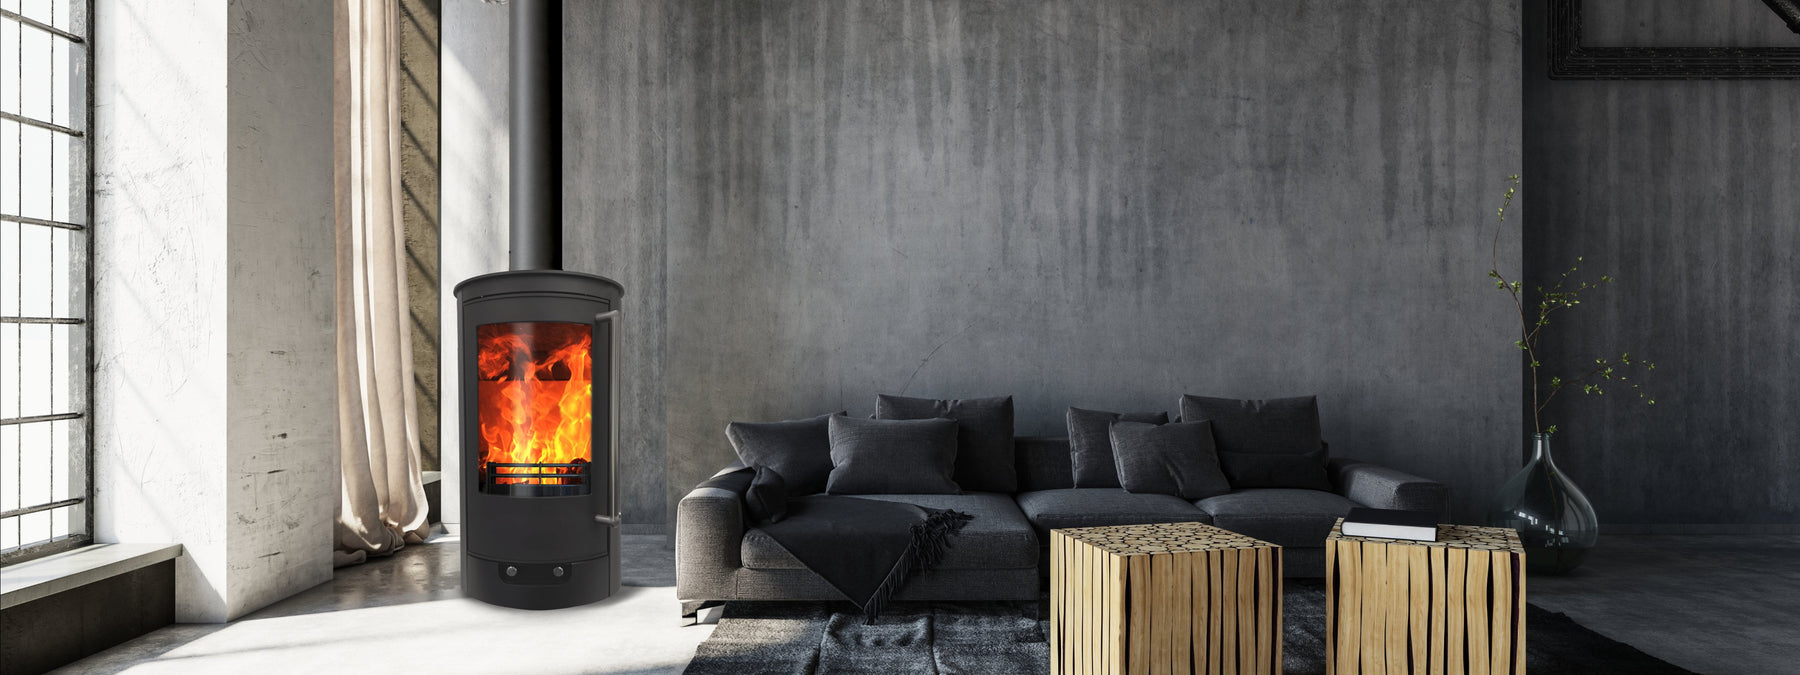 Sirocco Fires Launches 3 New Product Ranges - Siroccofires.com